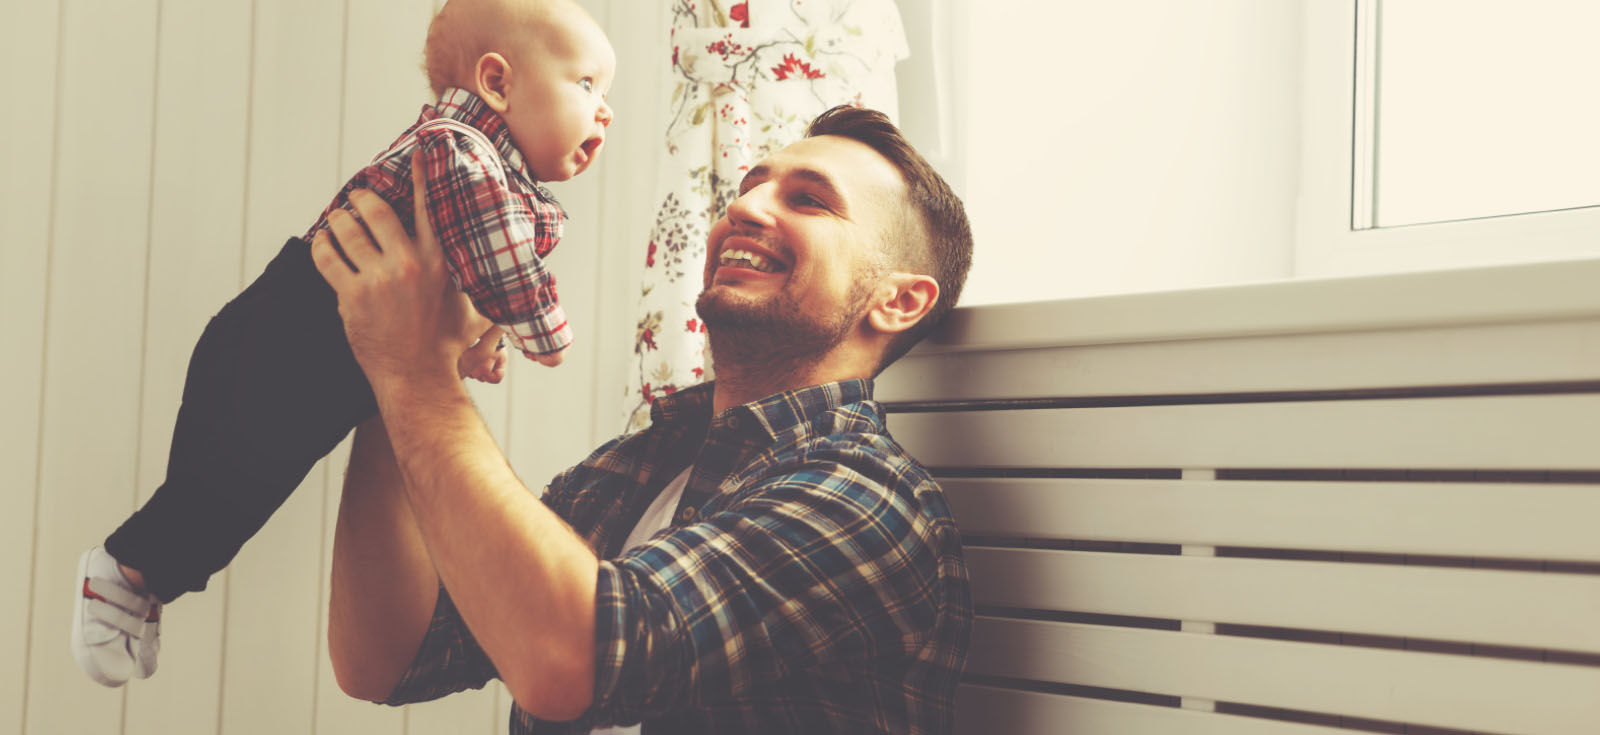 A man holding a baby up over his head to look out a window